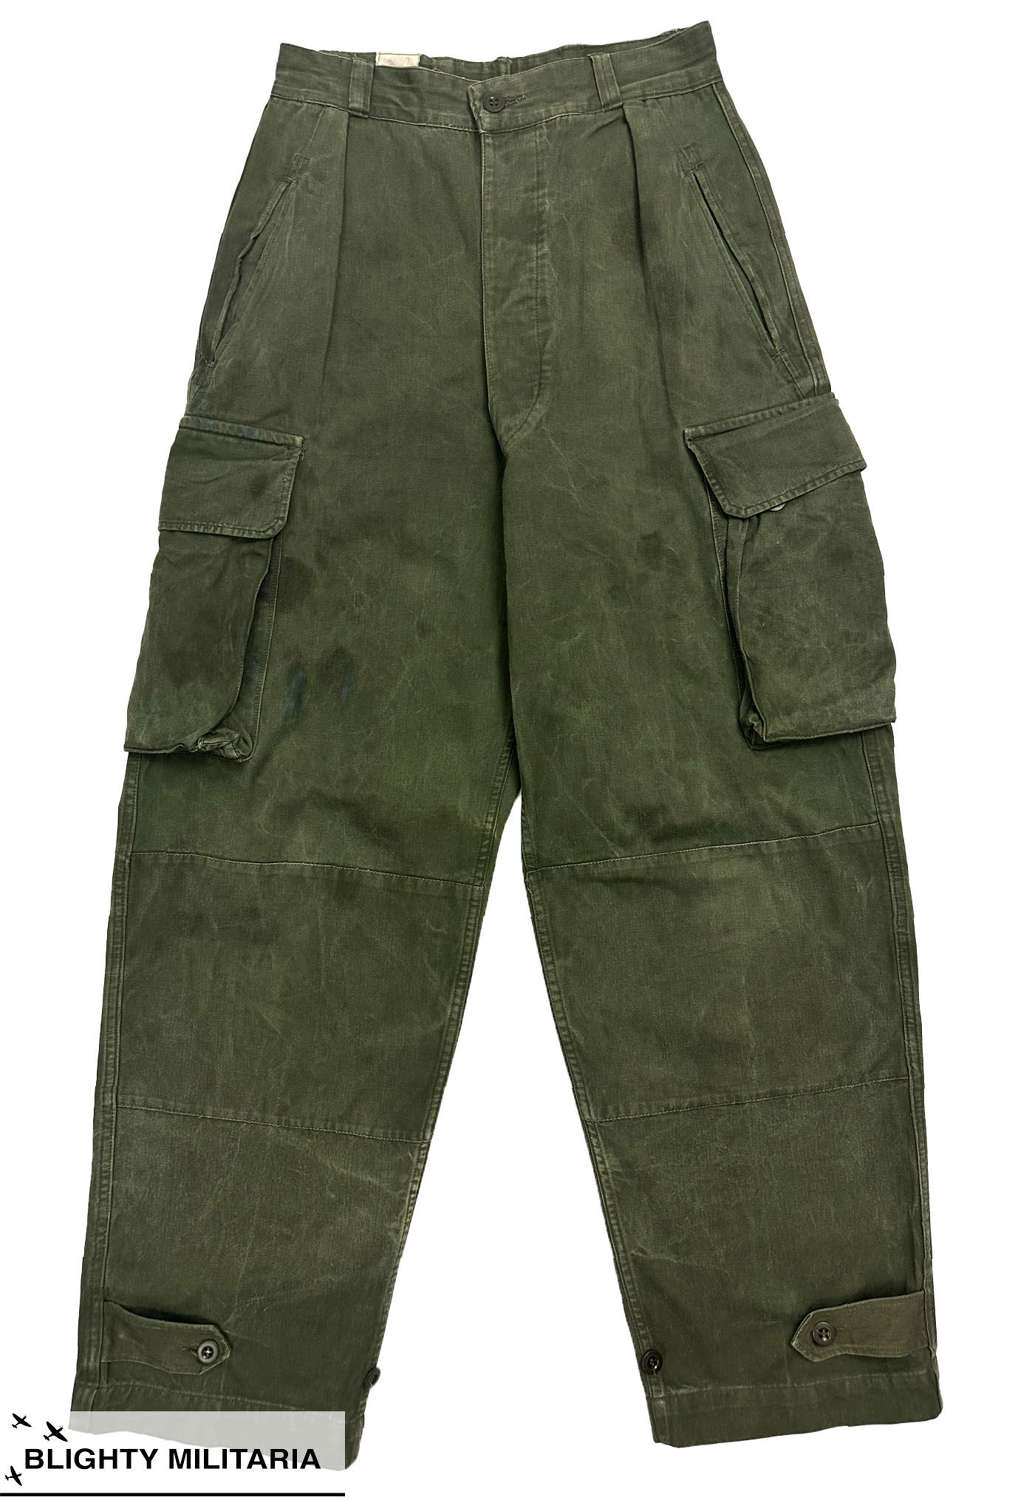 Original French Army M47 Trousers - Size 27 x 29 1/2